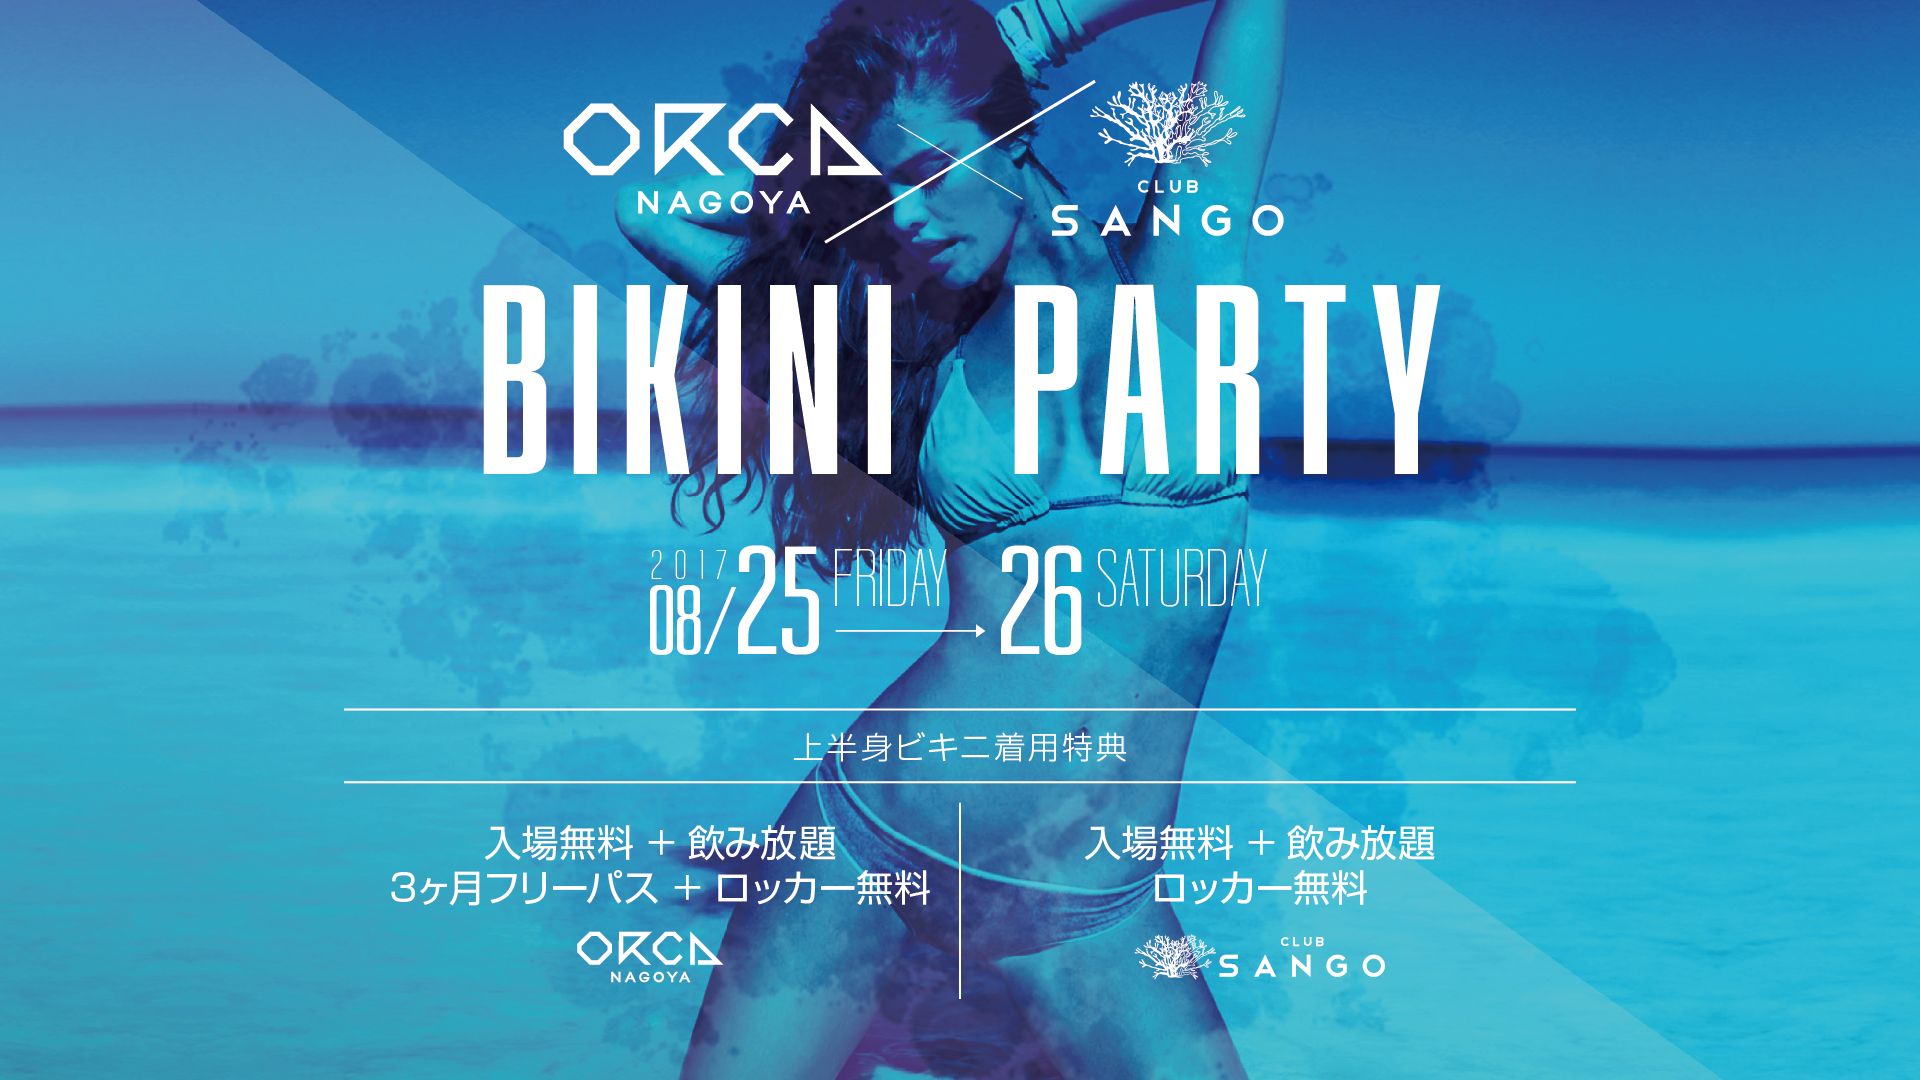 BIKINI PARTY / MUSIC CIRCUS’17 – OFFICIAL AFTER PARTY – / 『 SATURDAY NIGHT GALAXXY 』